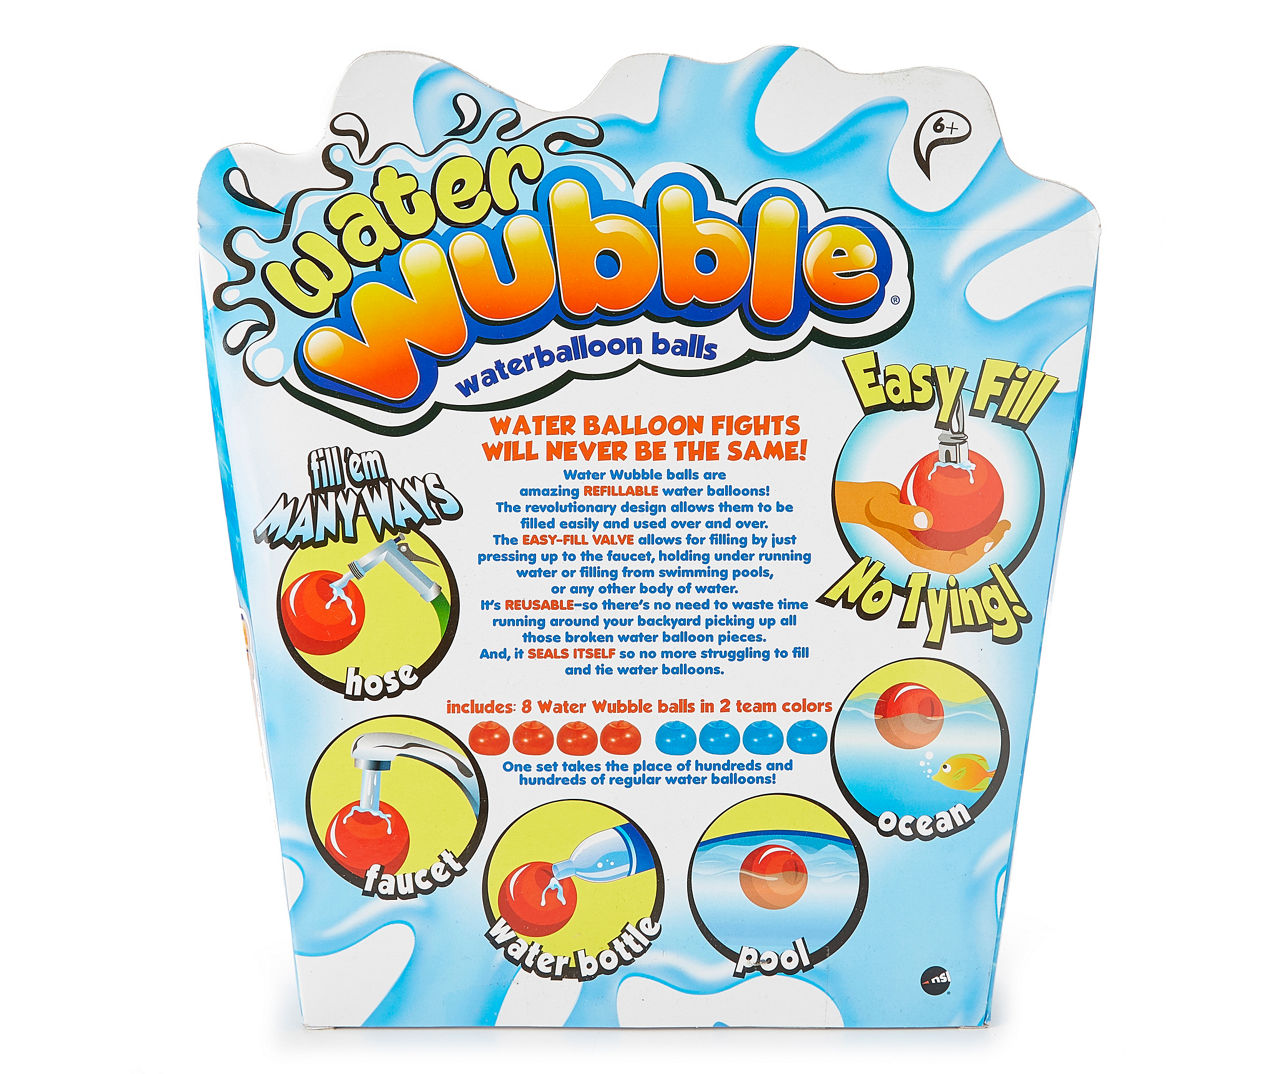 Details about   Wubble Bubble Ball Firm Water Balloons Inflatable Super Soft Refillable Stretch 